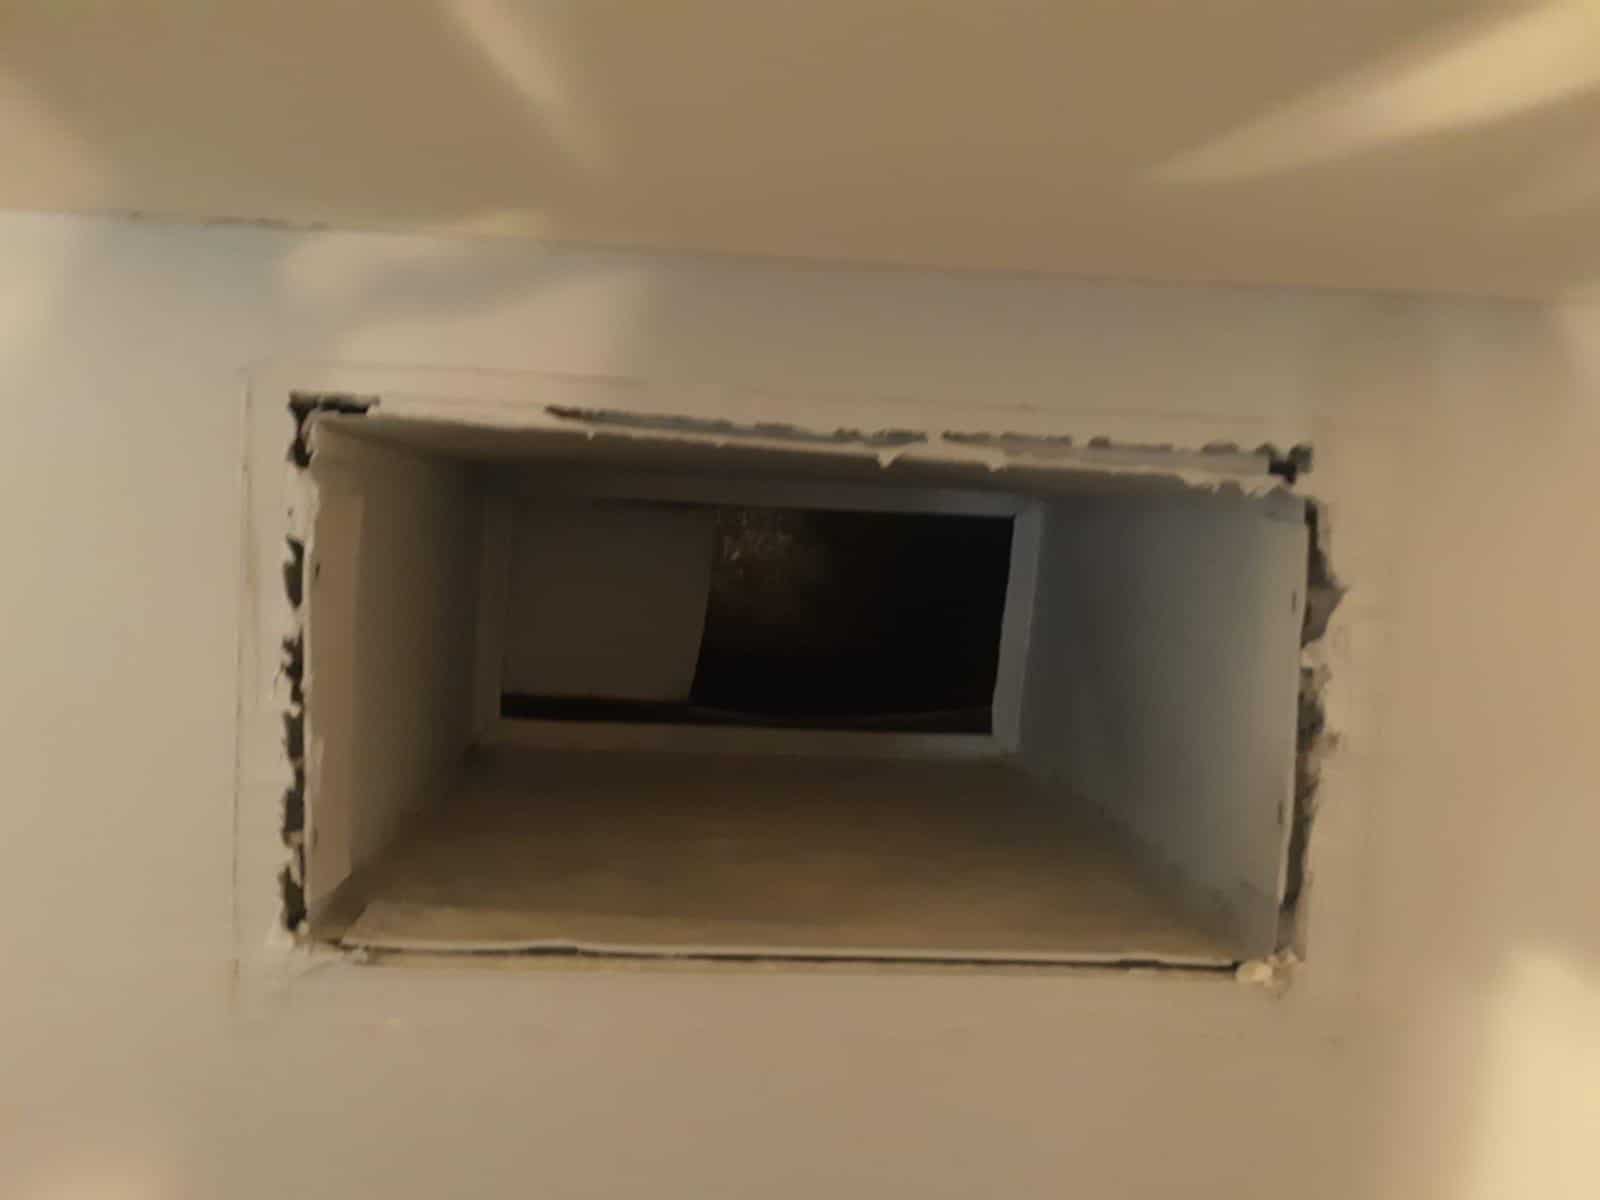 Air Duct Cleaning company near me Scottsdale AZ